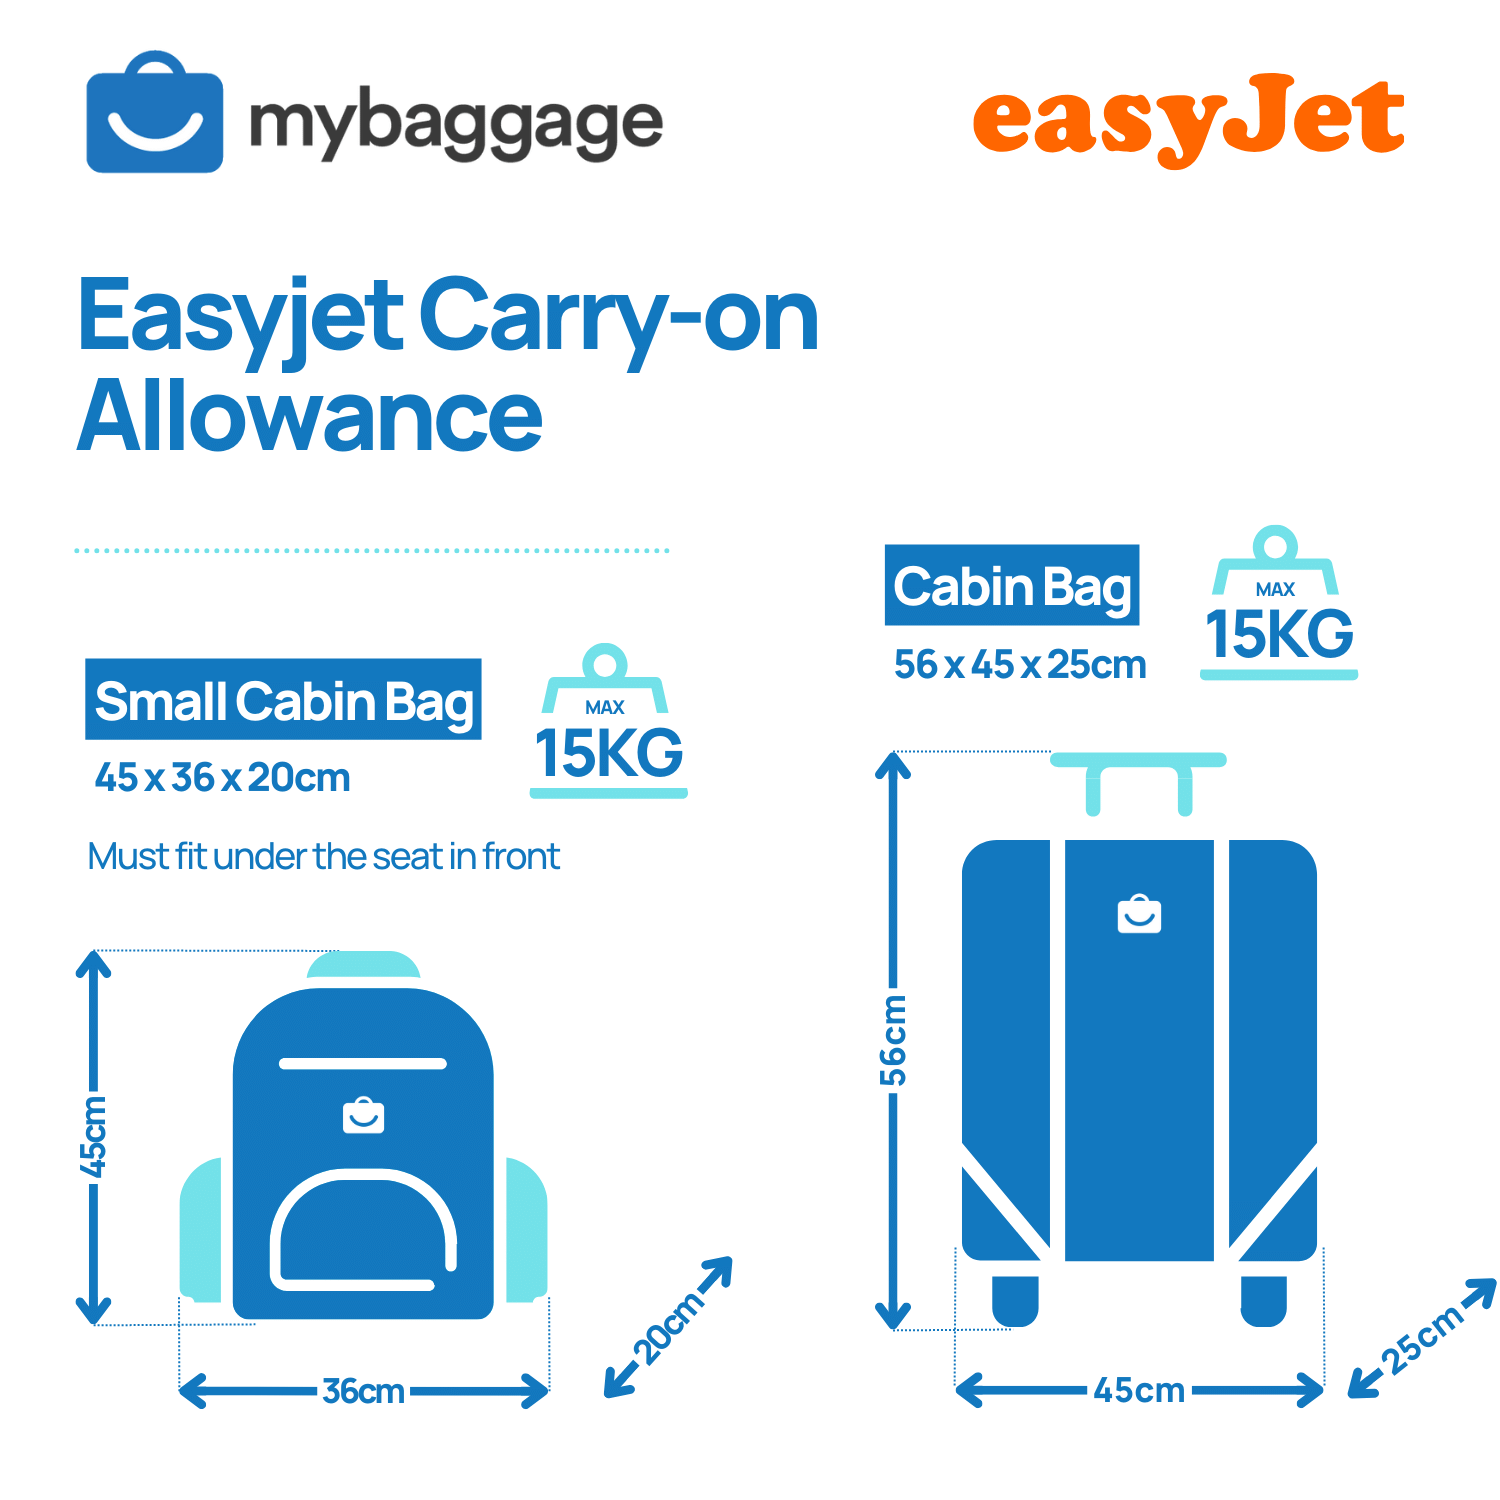 Easyjet Carry-on Luggage